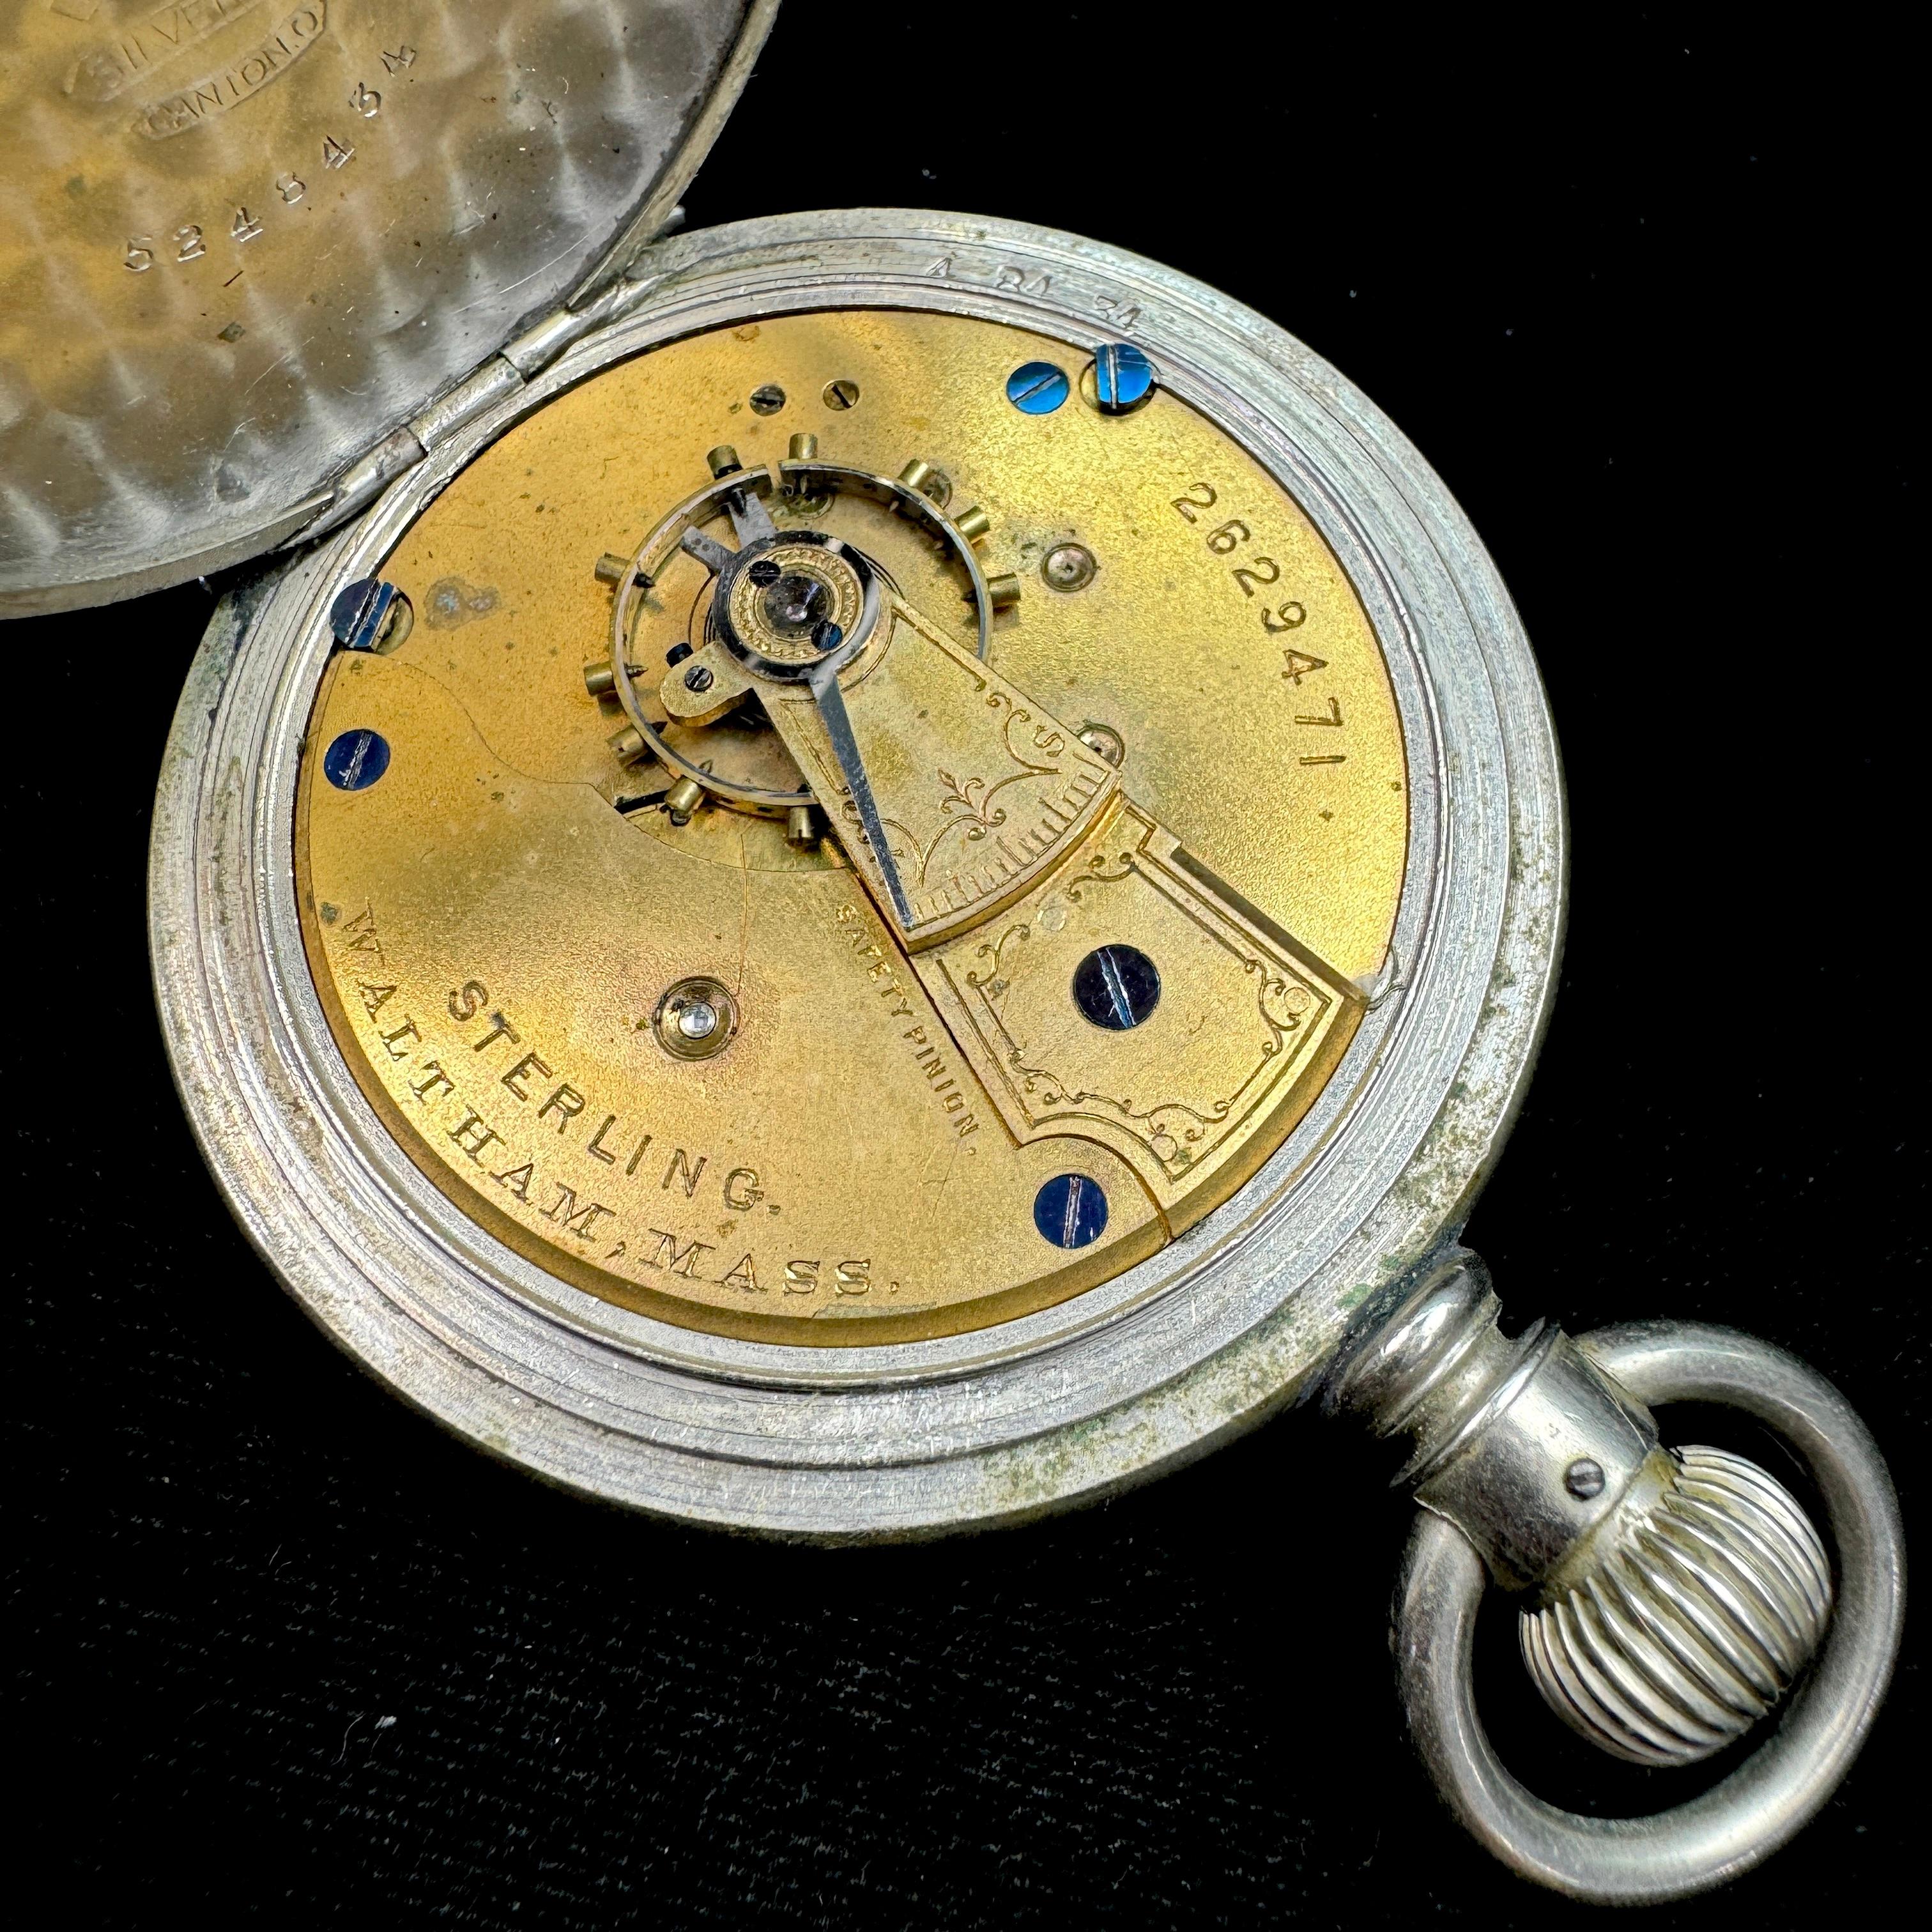 Circa 1885 7-jewel American Waltham "Sterling" model 1877 lever-set covered pocket watch